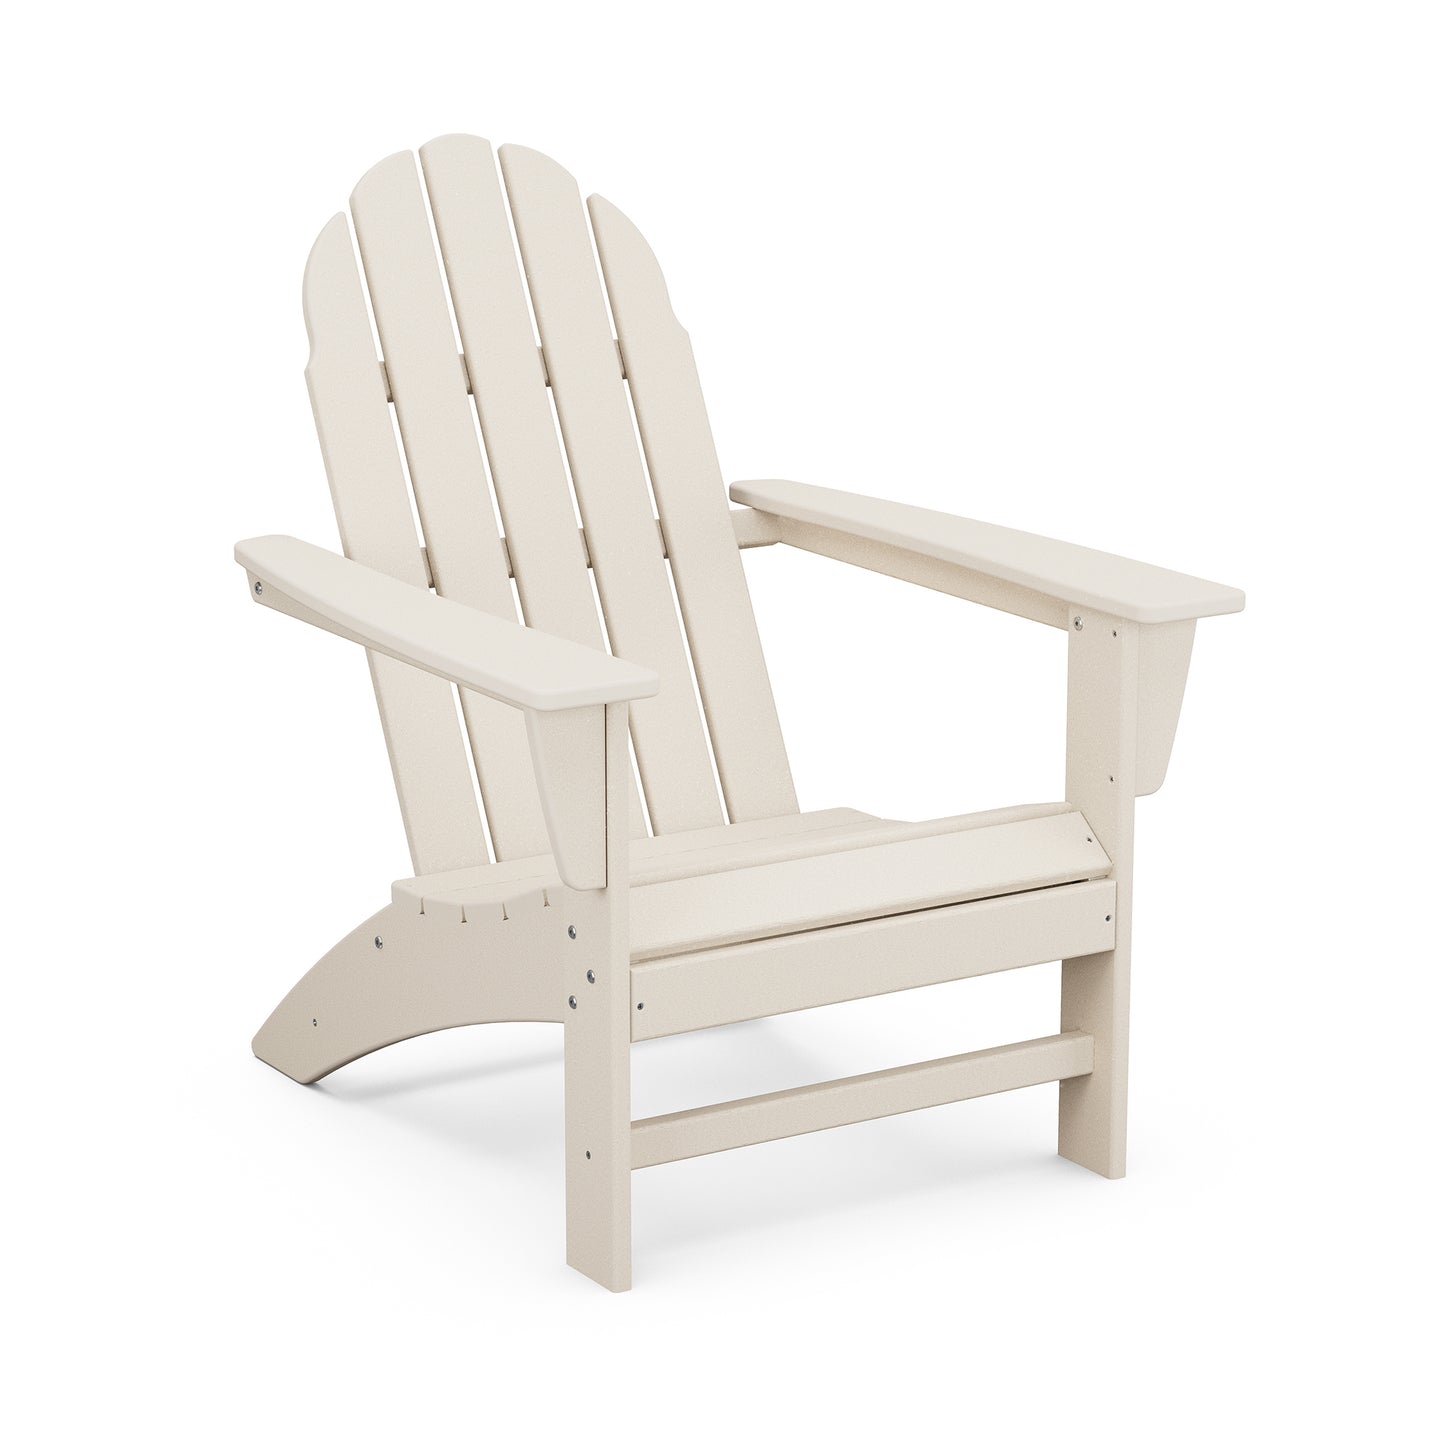 A beige POLYWOOD Vineyard Adirondack chair made of plastic, featuring a slatted design, wide armrests, and a gently sloping back, isolated on a white background.